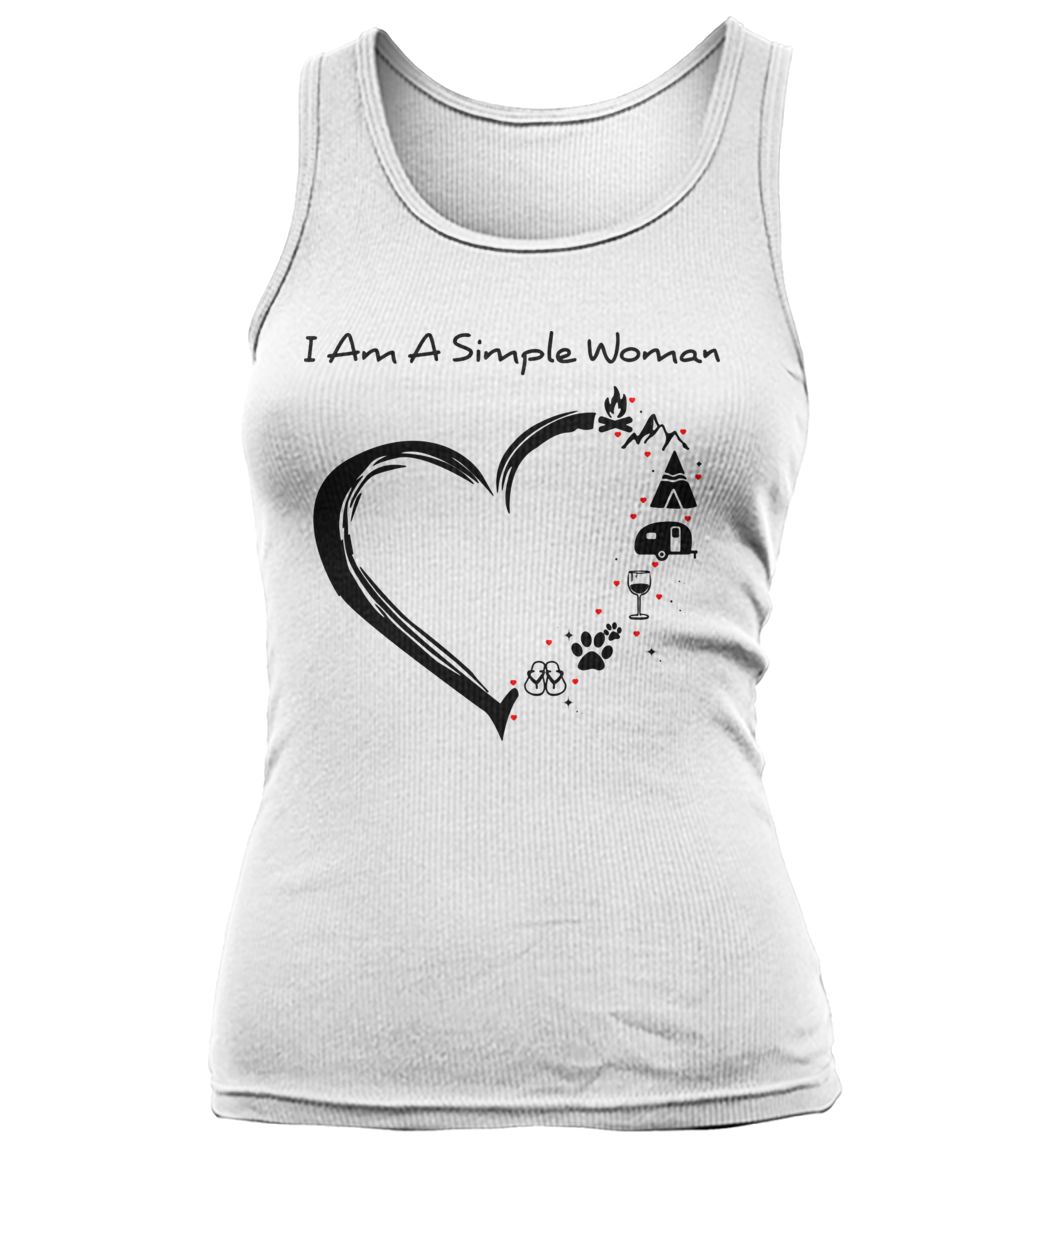 I'm a simple woman camping heart women's tank top